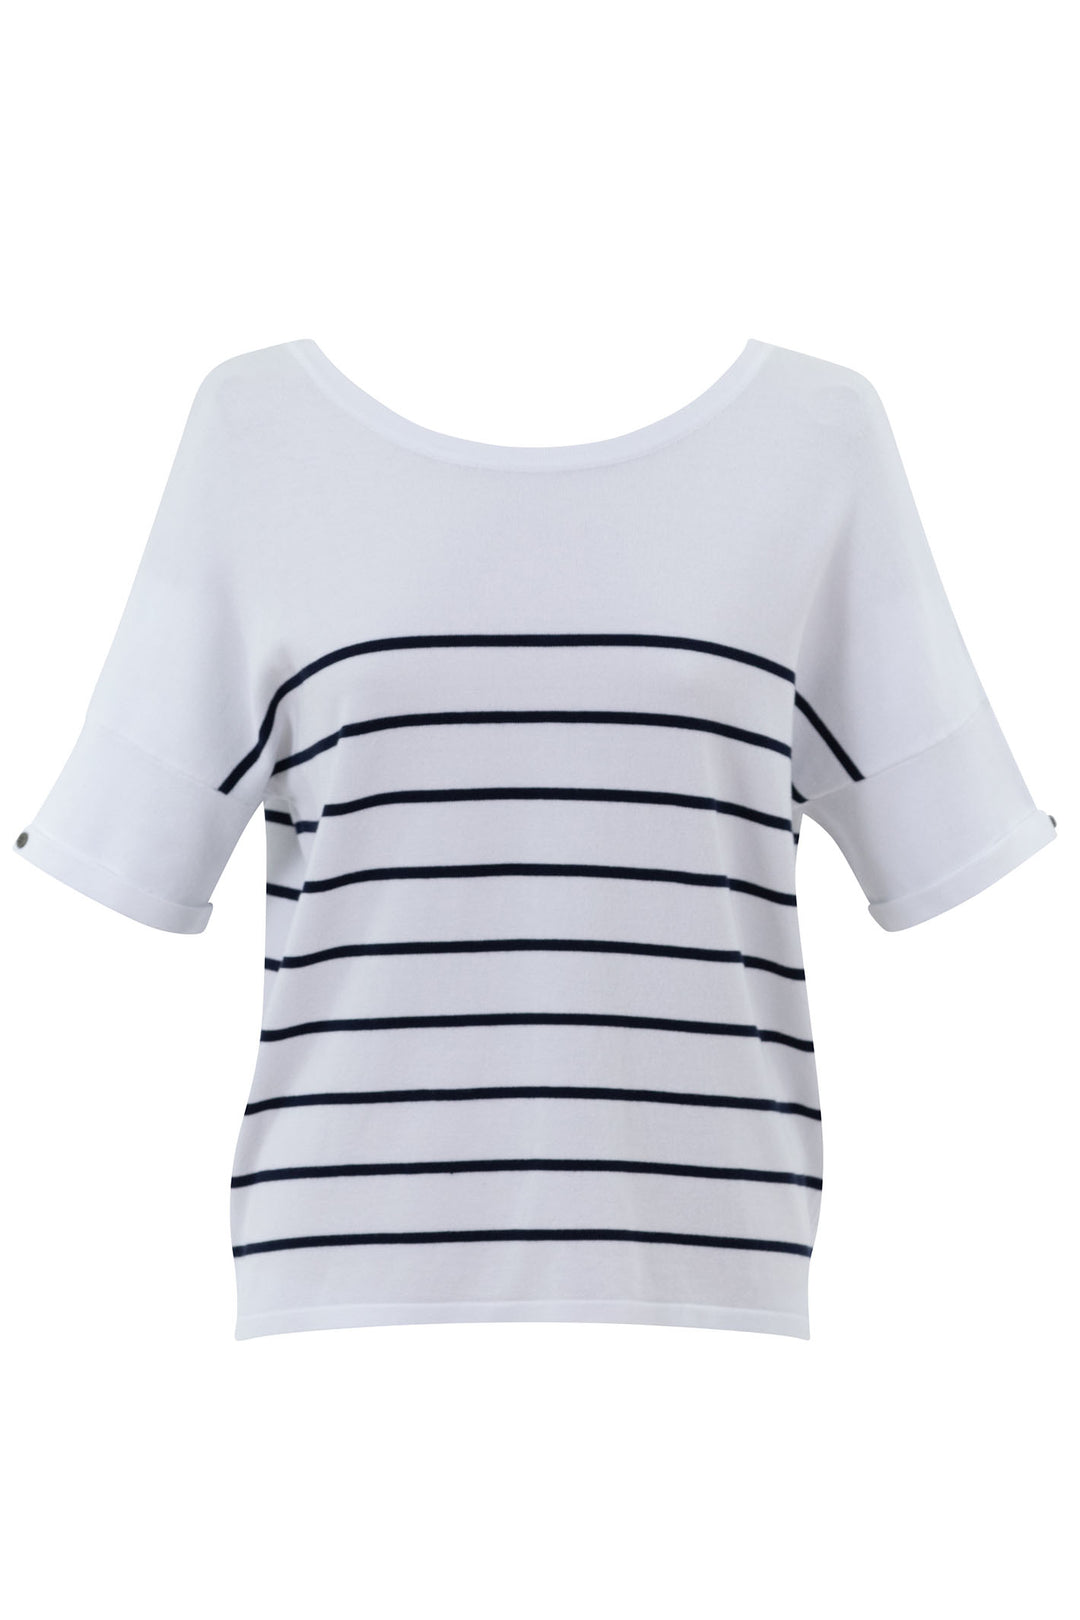 Marble Fashions 7335 103 White & Navy Stripe Knit Top - Experience Boutique